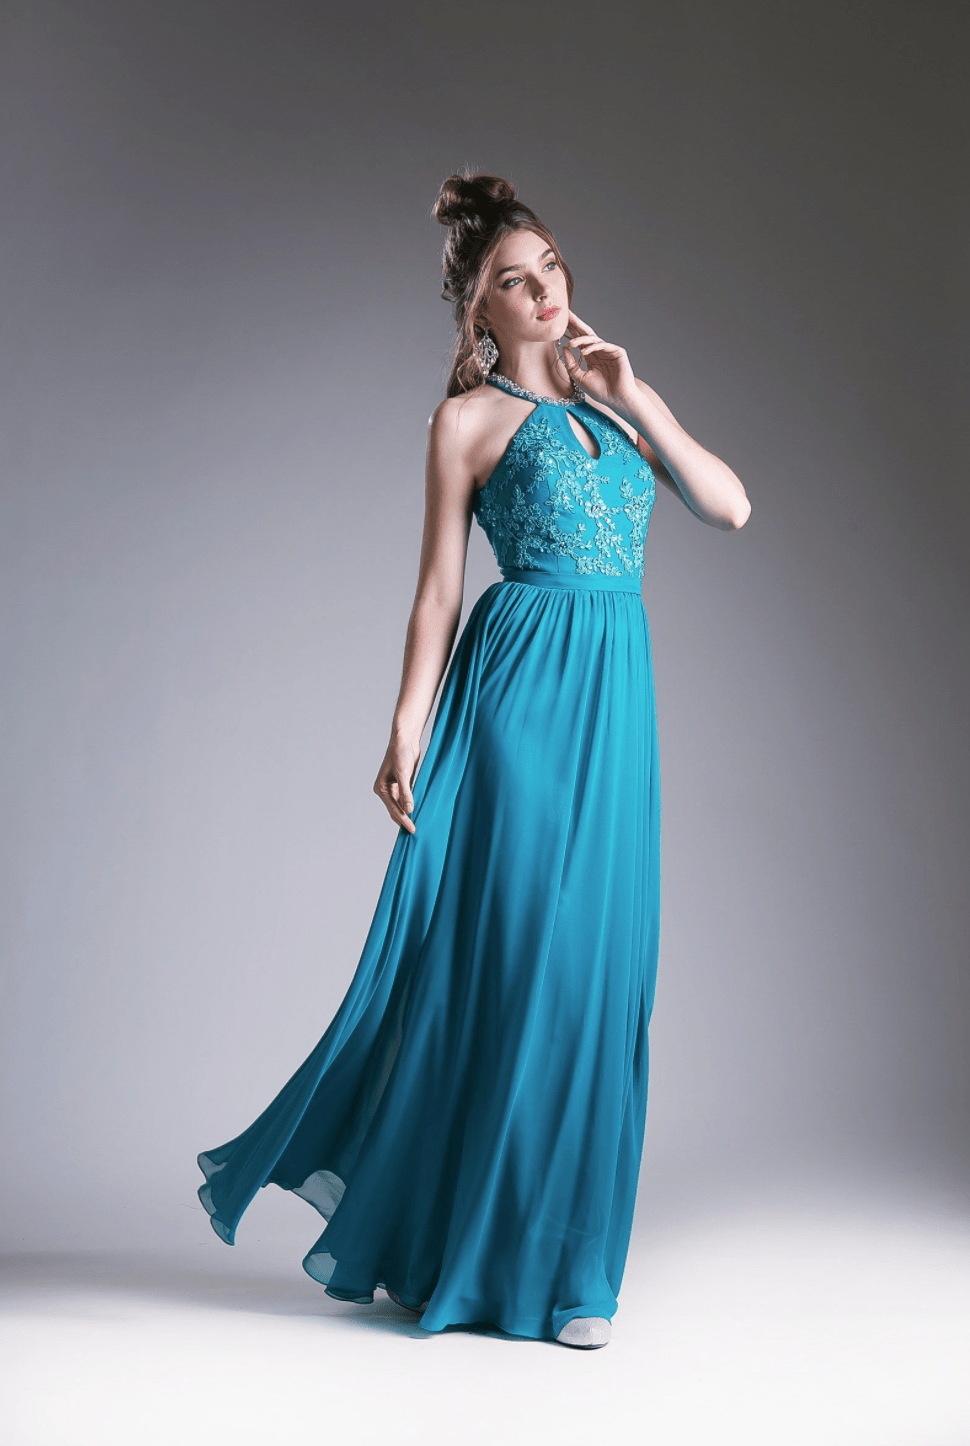 Teal Halter Dress by Ladivine - NORMA REED